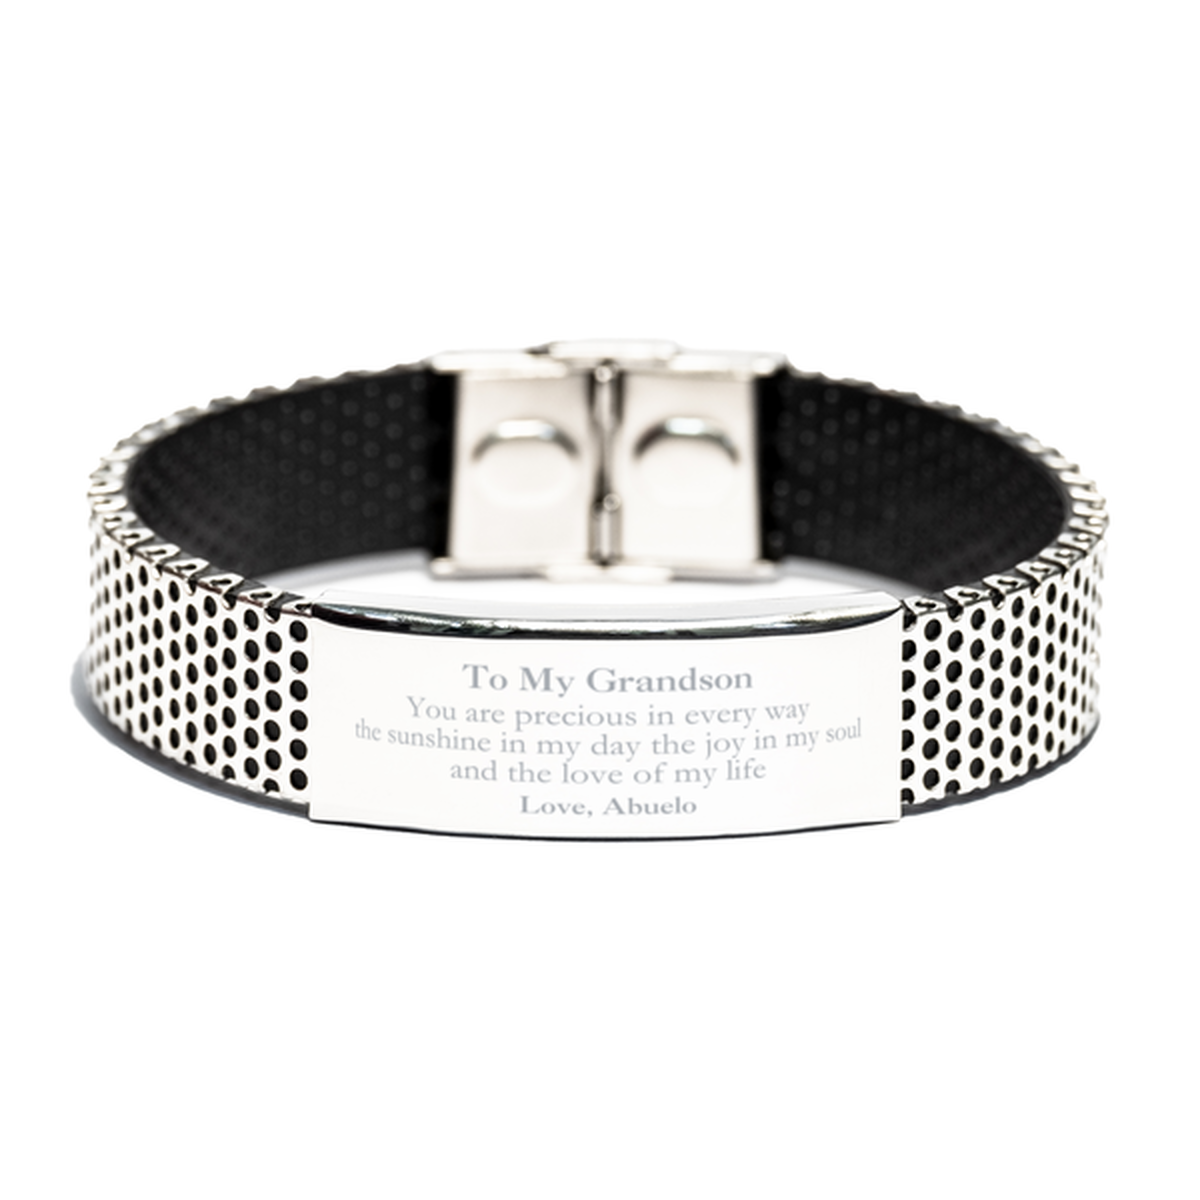 Graduation Gifts for Grandson Stainless Steel Bracelet Present from Abuelo, Christmas Grandson Birthday Gifts Grandson You are precious in every way the sunshine in my day. Love, Abuelo